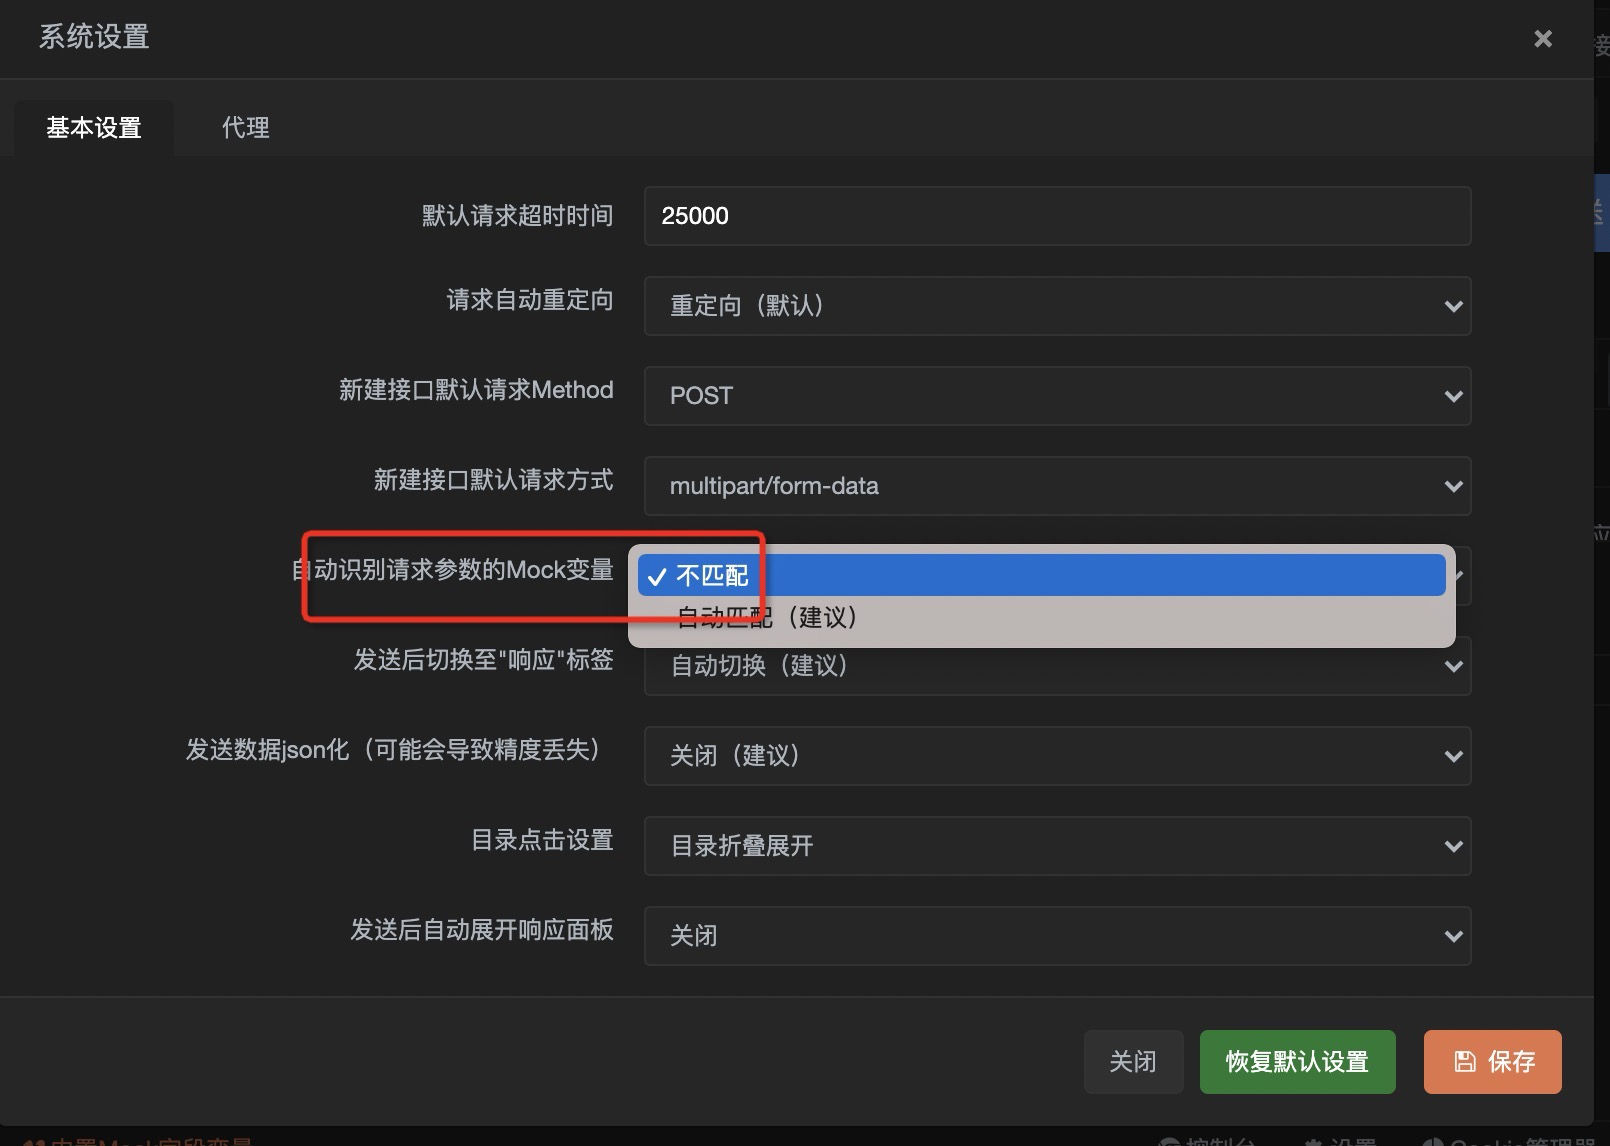 ApiPost报TypeError: Cannot read property 'oauth' of undefined的解决方案